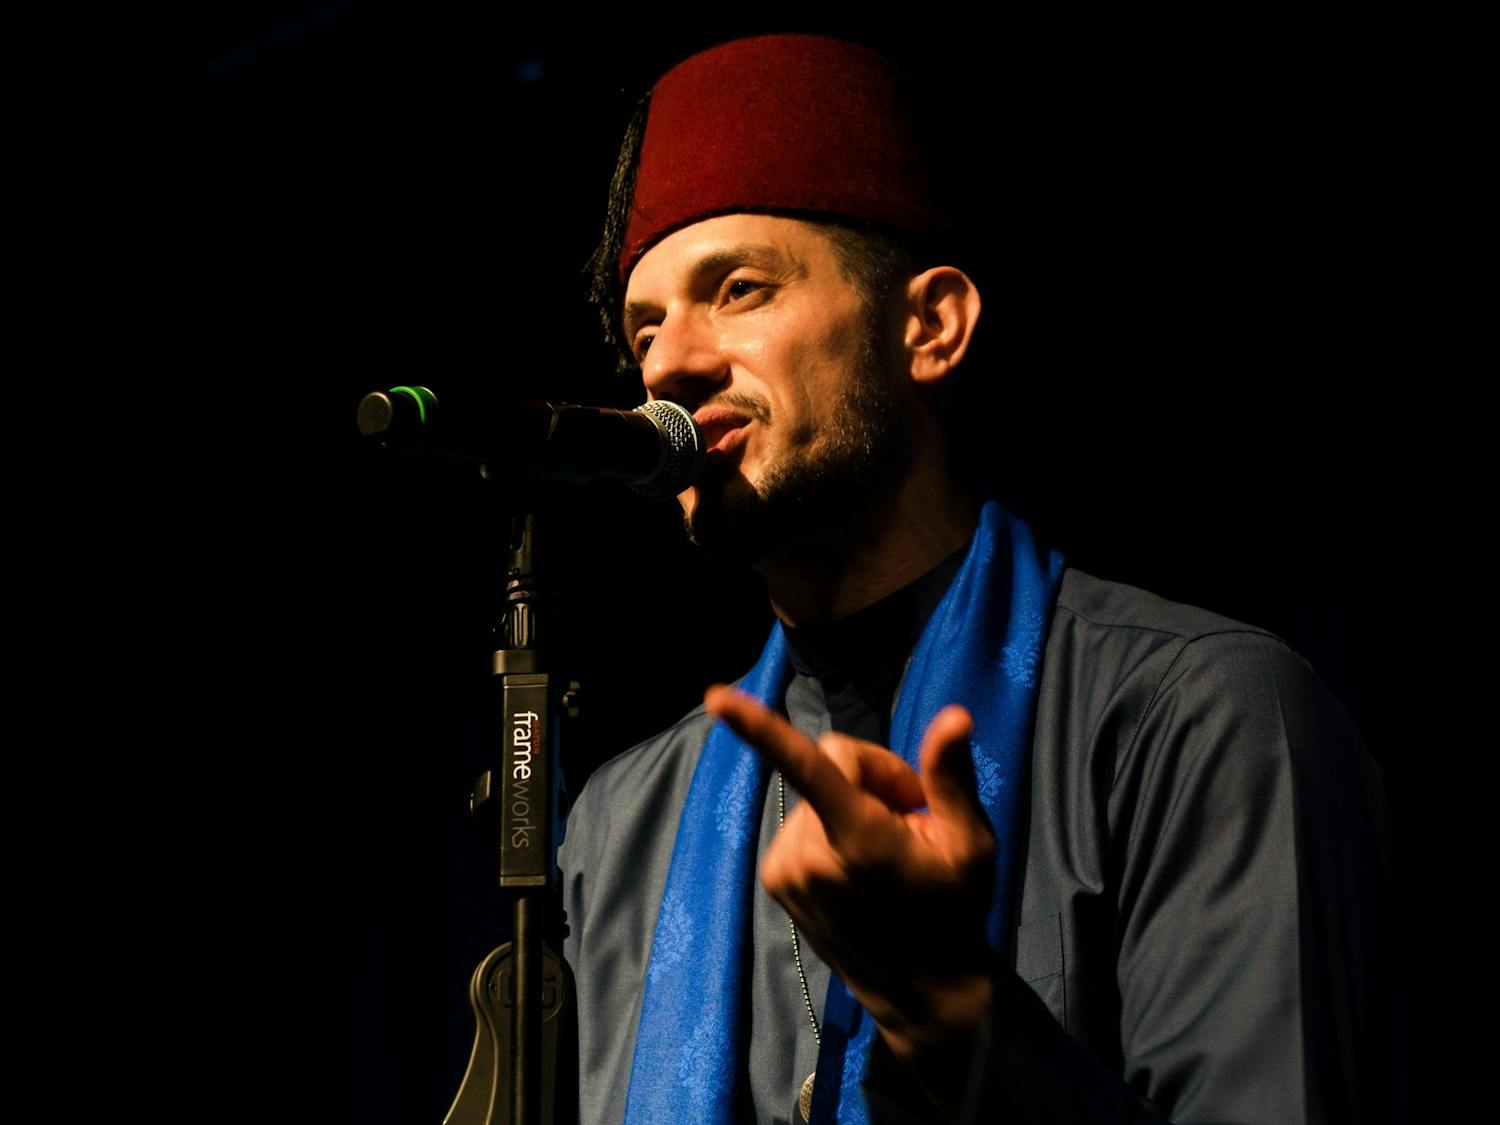 Omar Offendum, a Syrian-American hip-hop artist based in Los Angeles, performs at the UNC Center for Middle East and Islamic Studies 20th Anniversary Celebration on March 3, 2023. Photo Courtesy of Cemil Aydin.